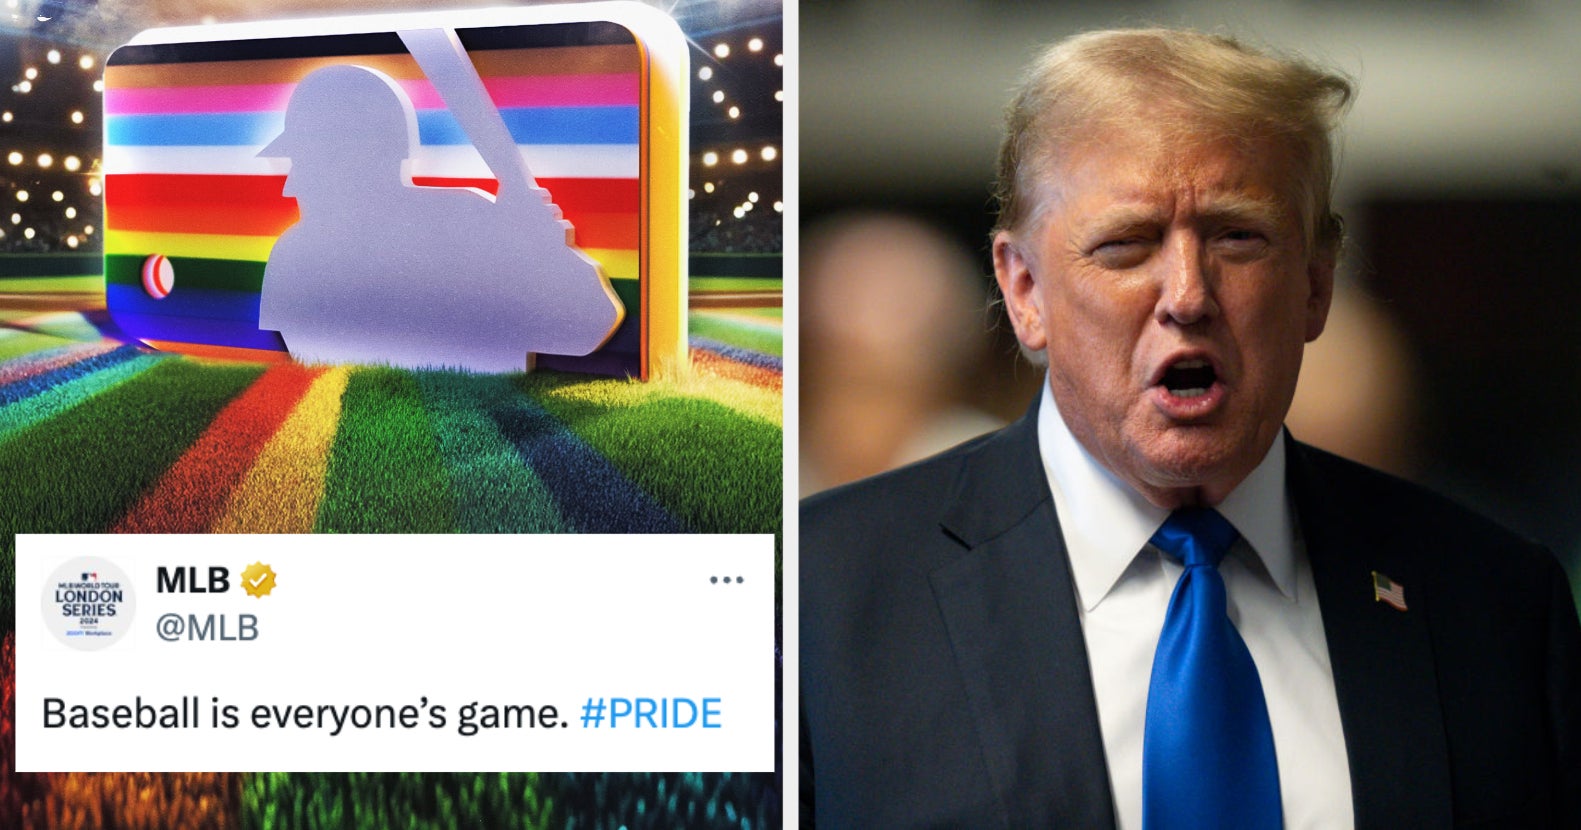 People Are Losing Their Minds Over The MLB's Pride Tweet